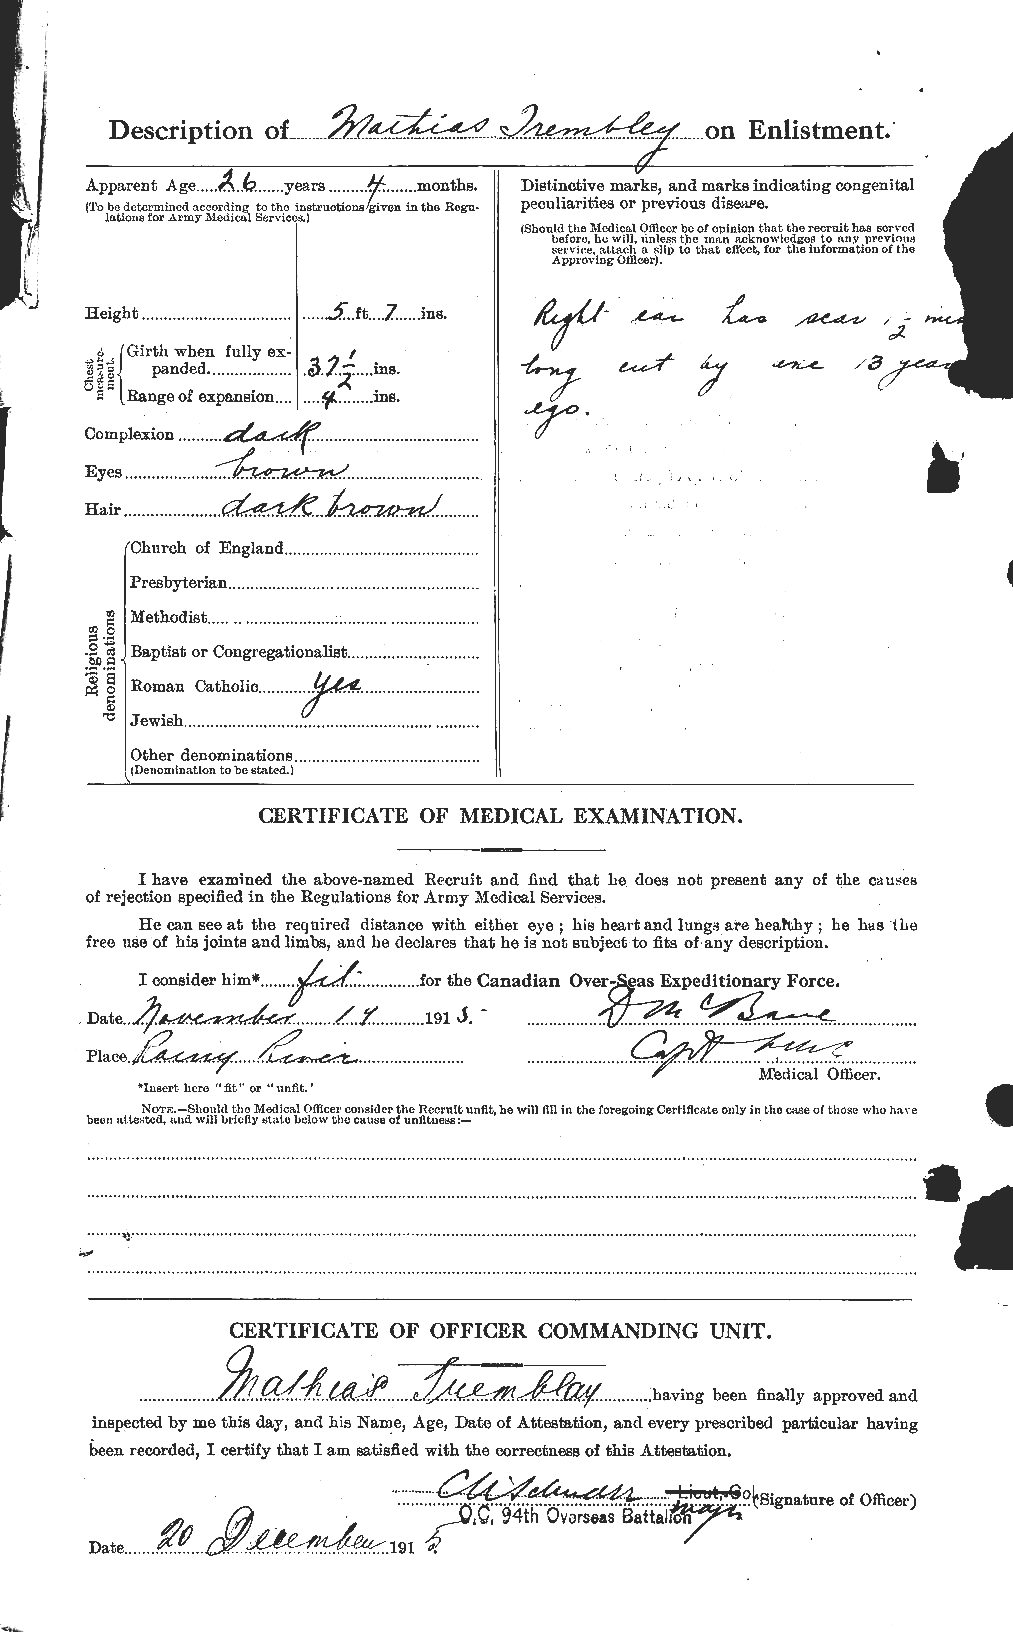 Personnel Records of the First World War - CEF 639202b